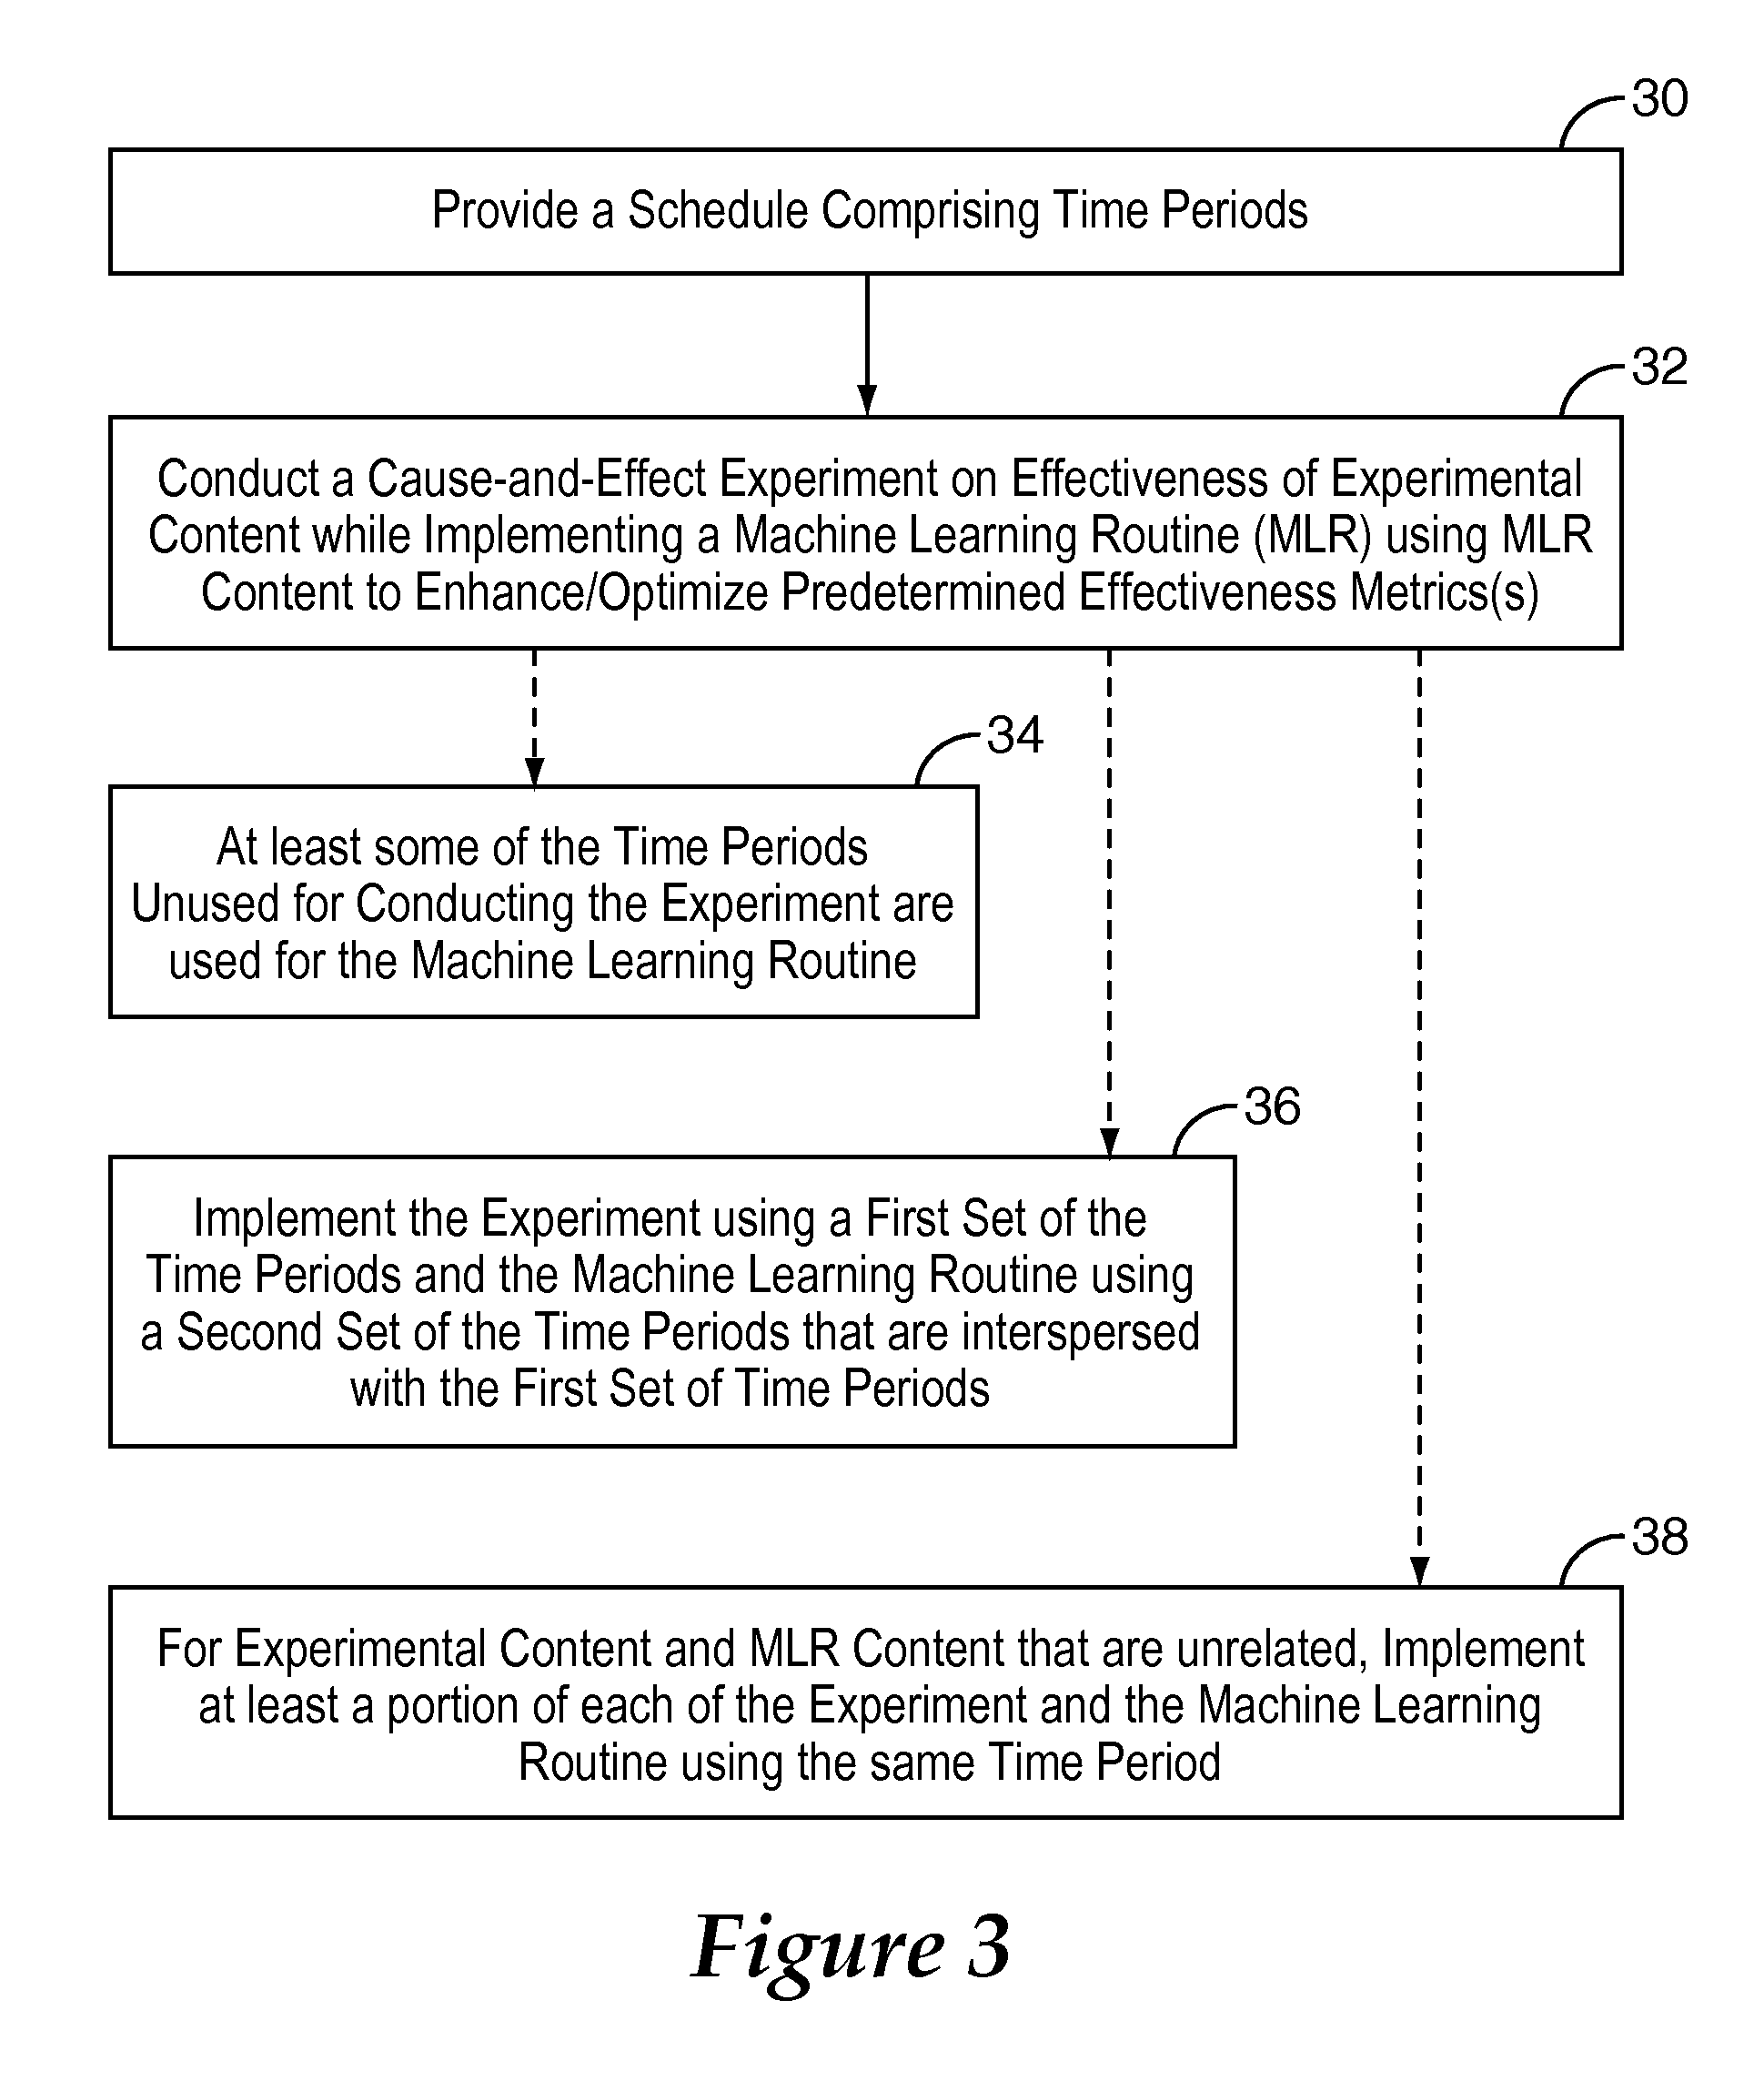 System and method for concurrently conducting cause-and-effect experiments on content effectiveness and adjusting content distribution to optimize business objectives